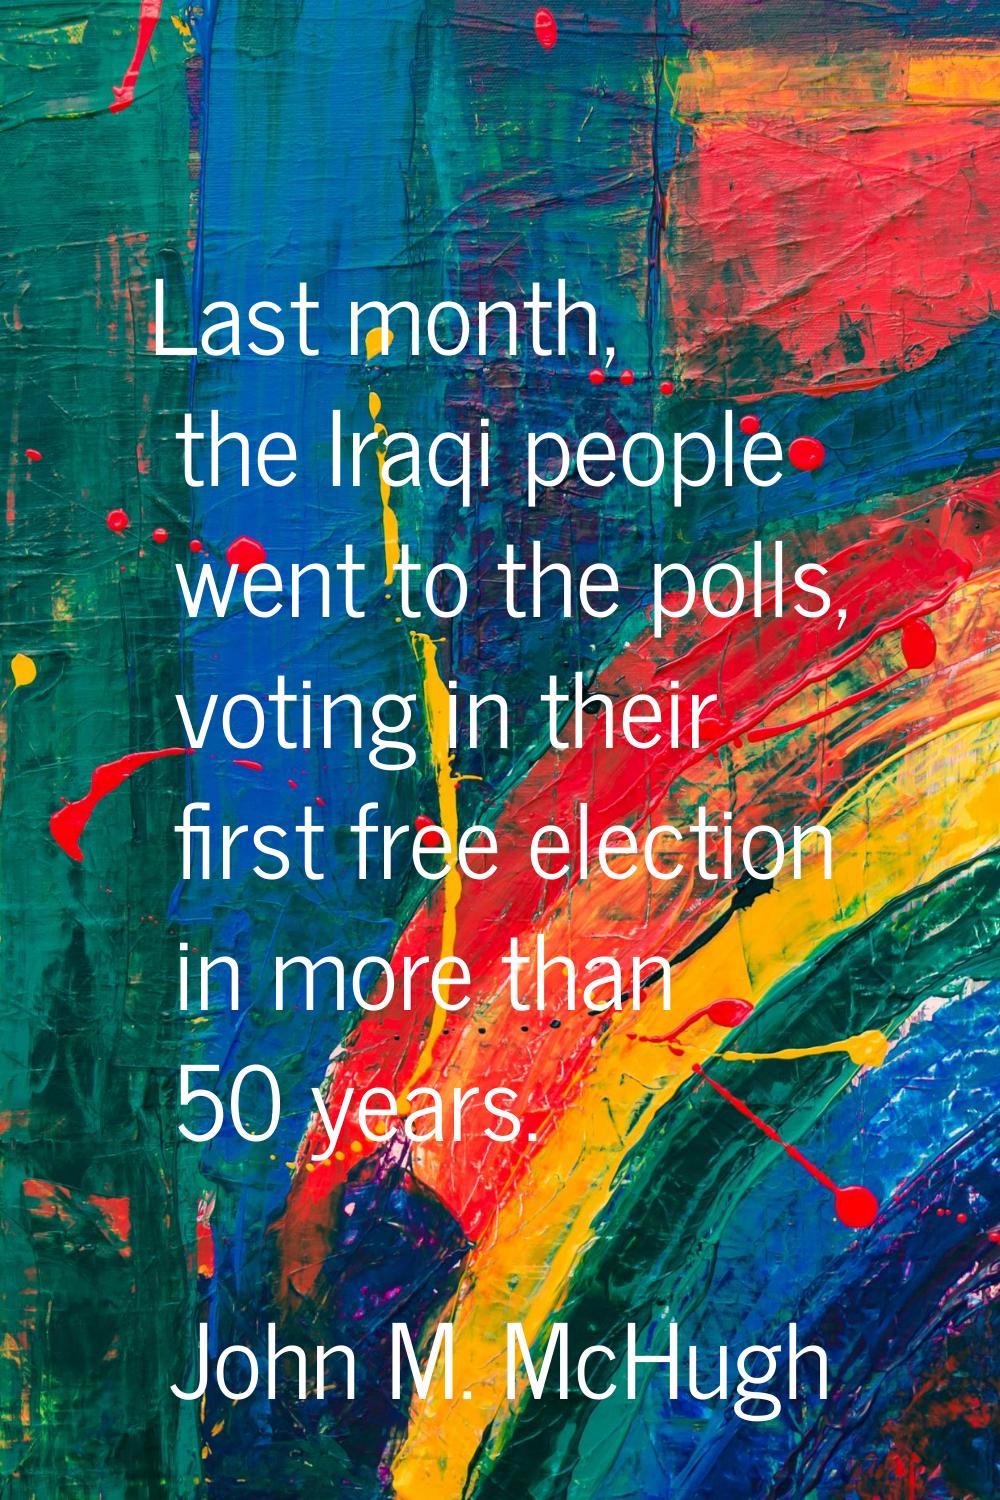 Last month, the Iraqi people went to the polls, voting in their first free election in more than 50